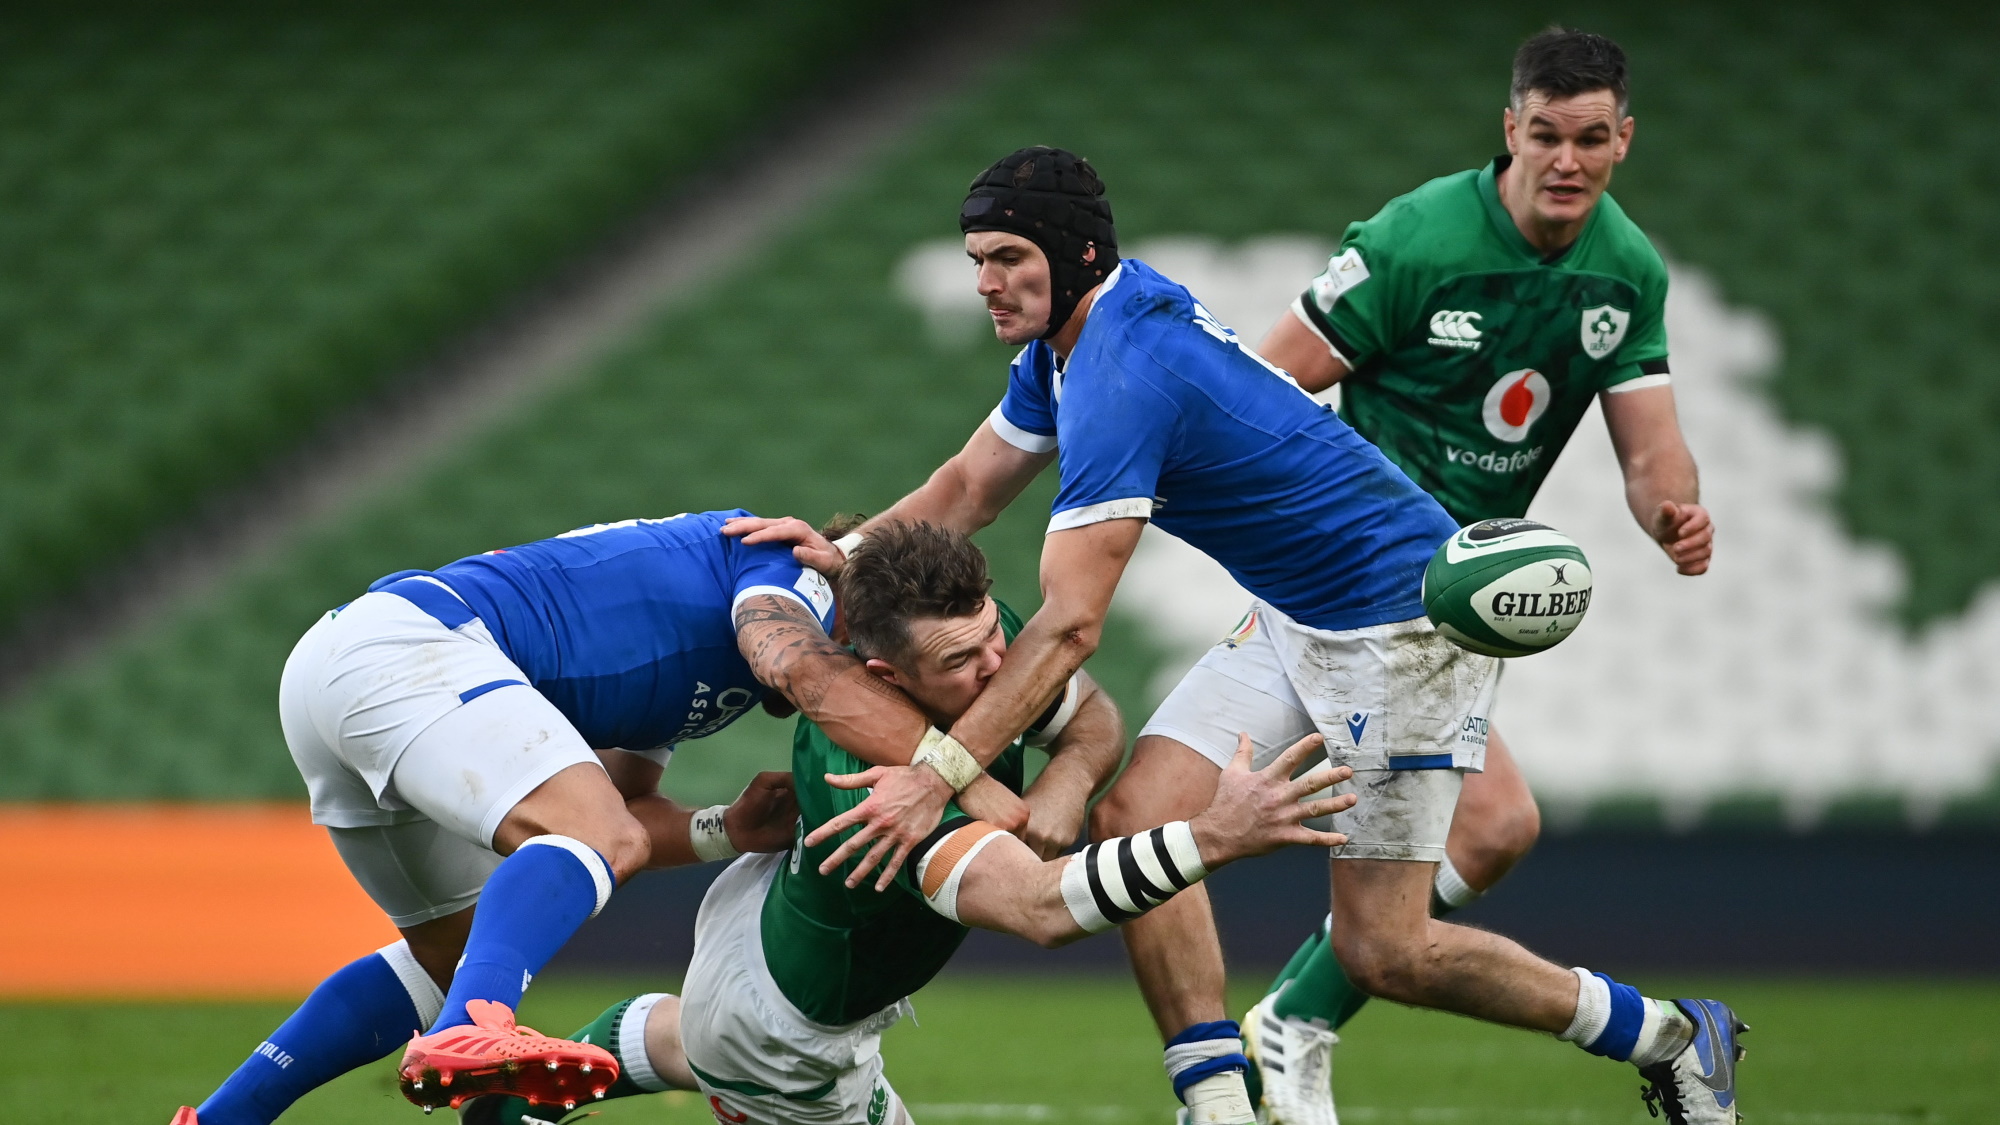 stream 6 nations rugby online free